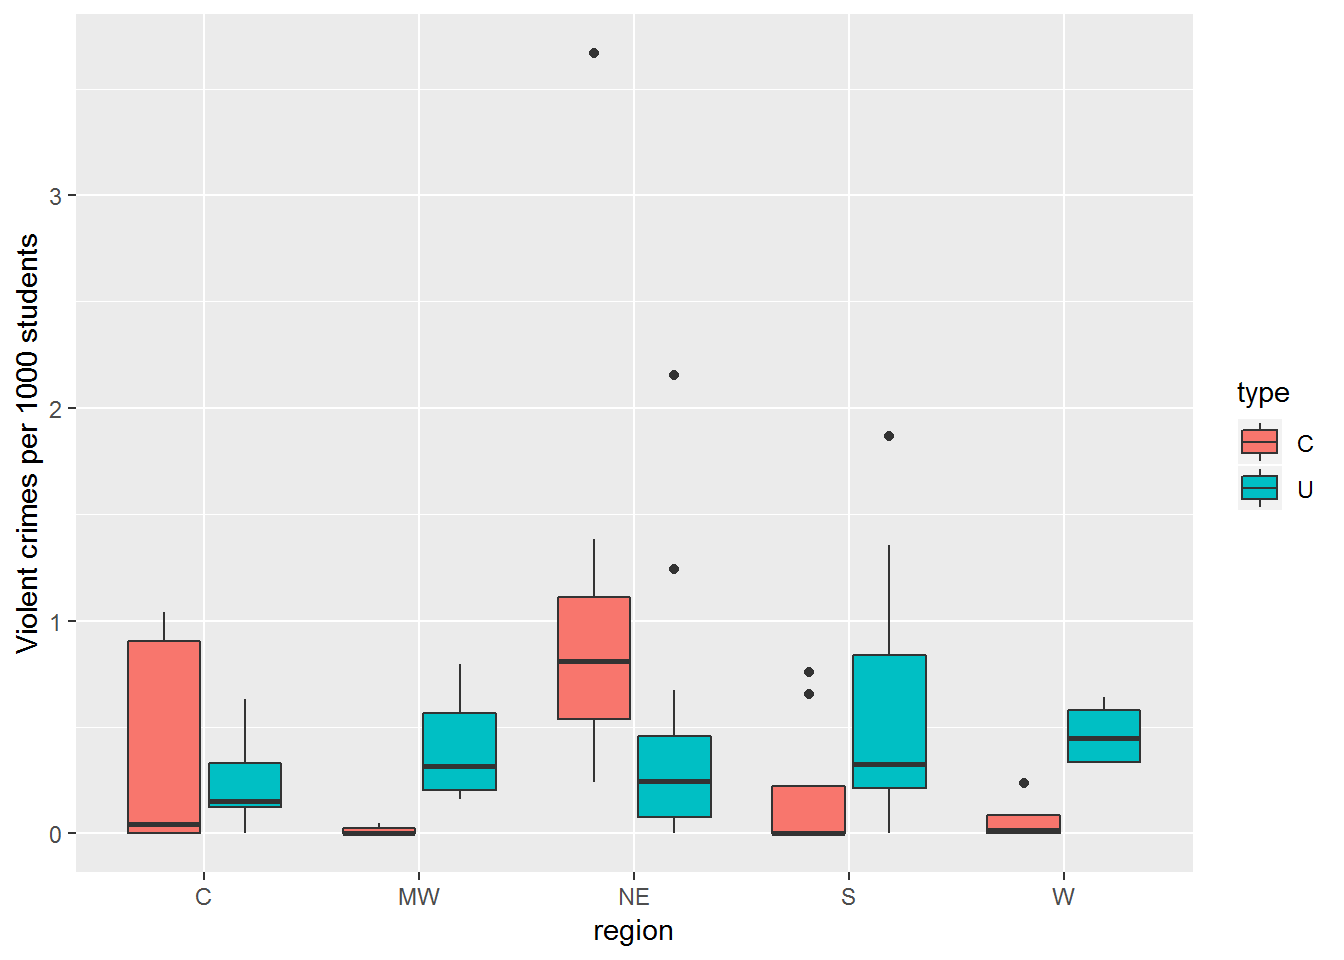 Boxplot of violent crime rate by region and type of institituion